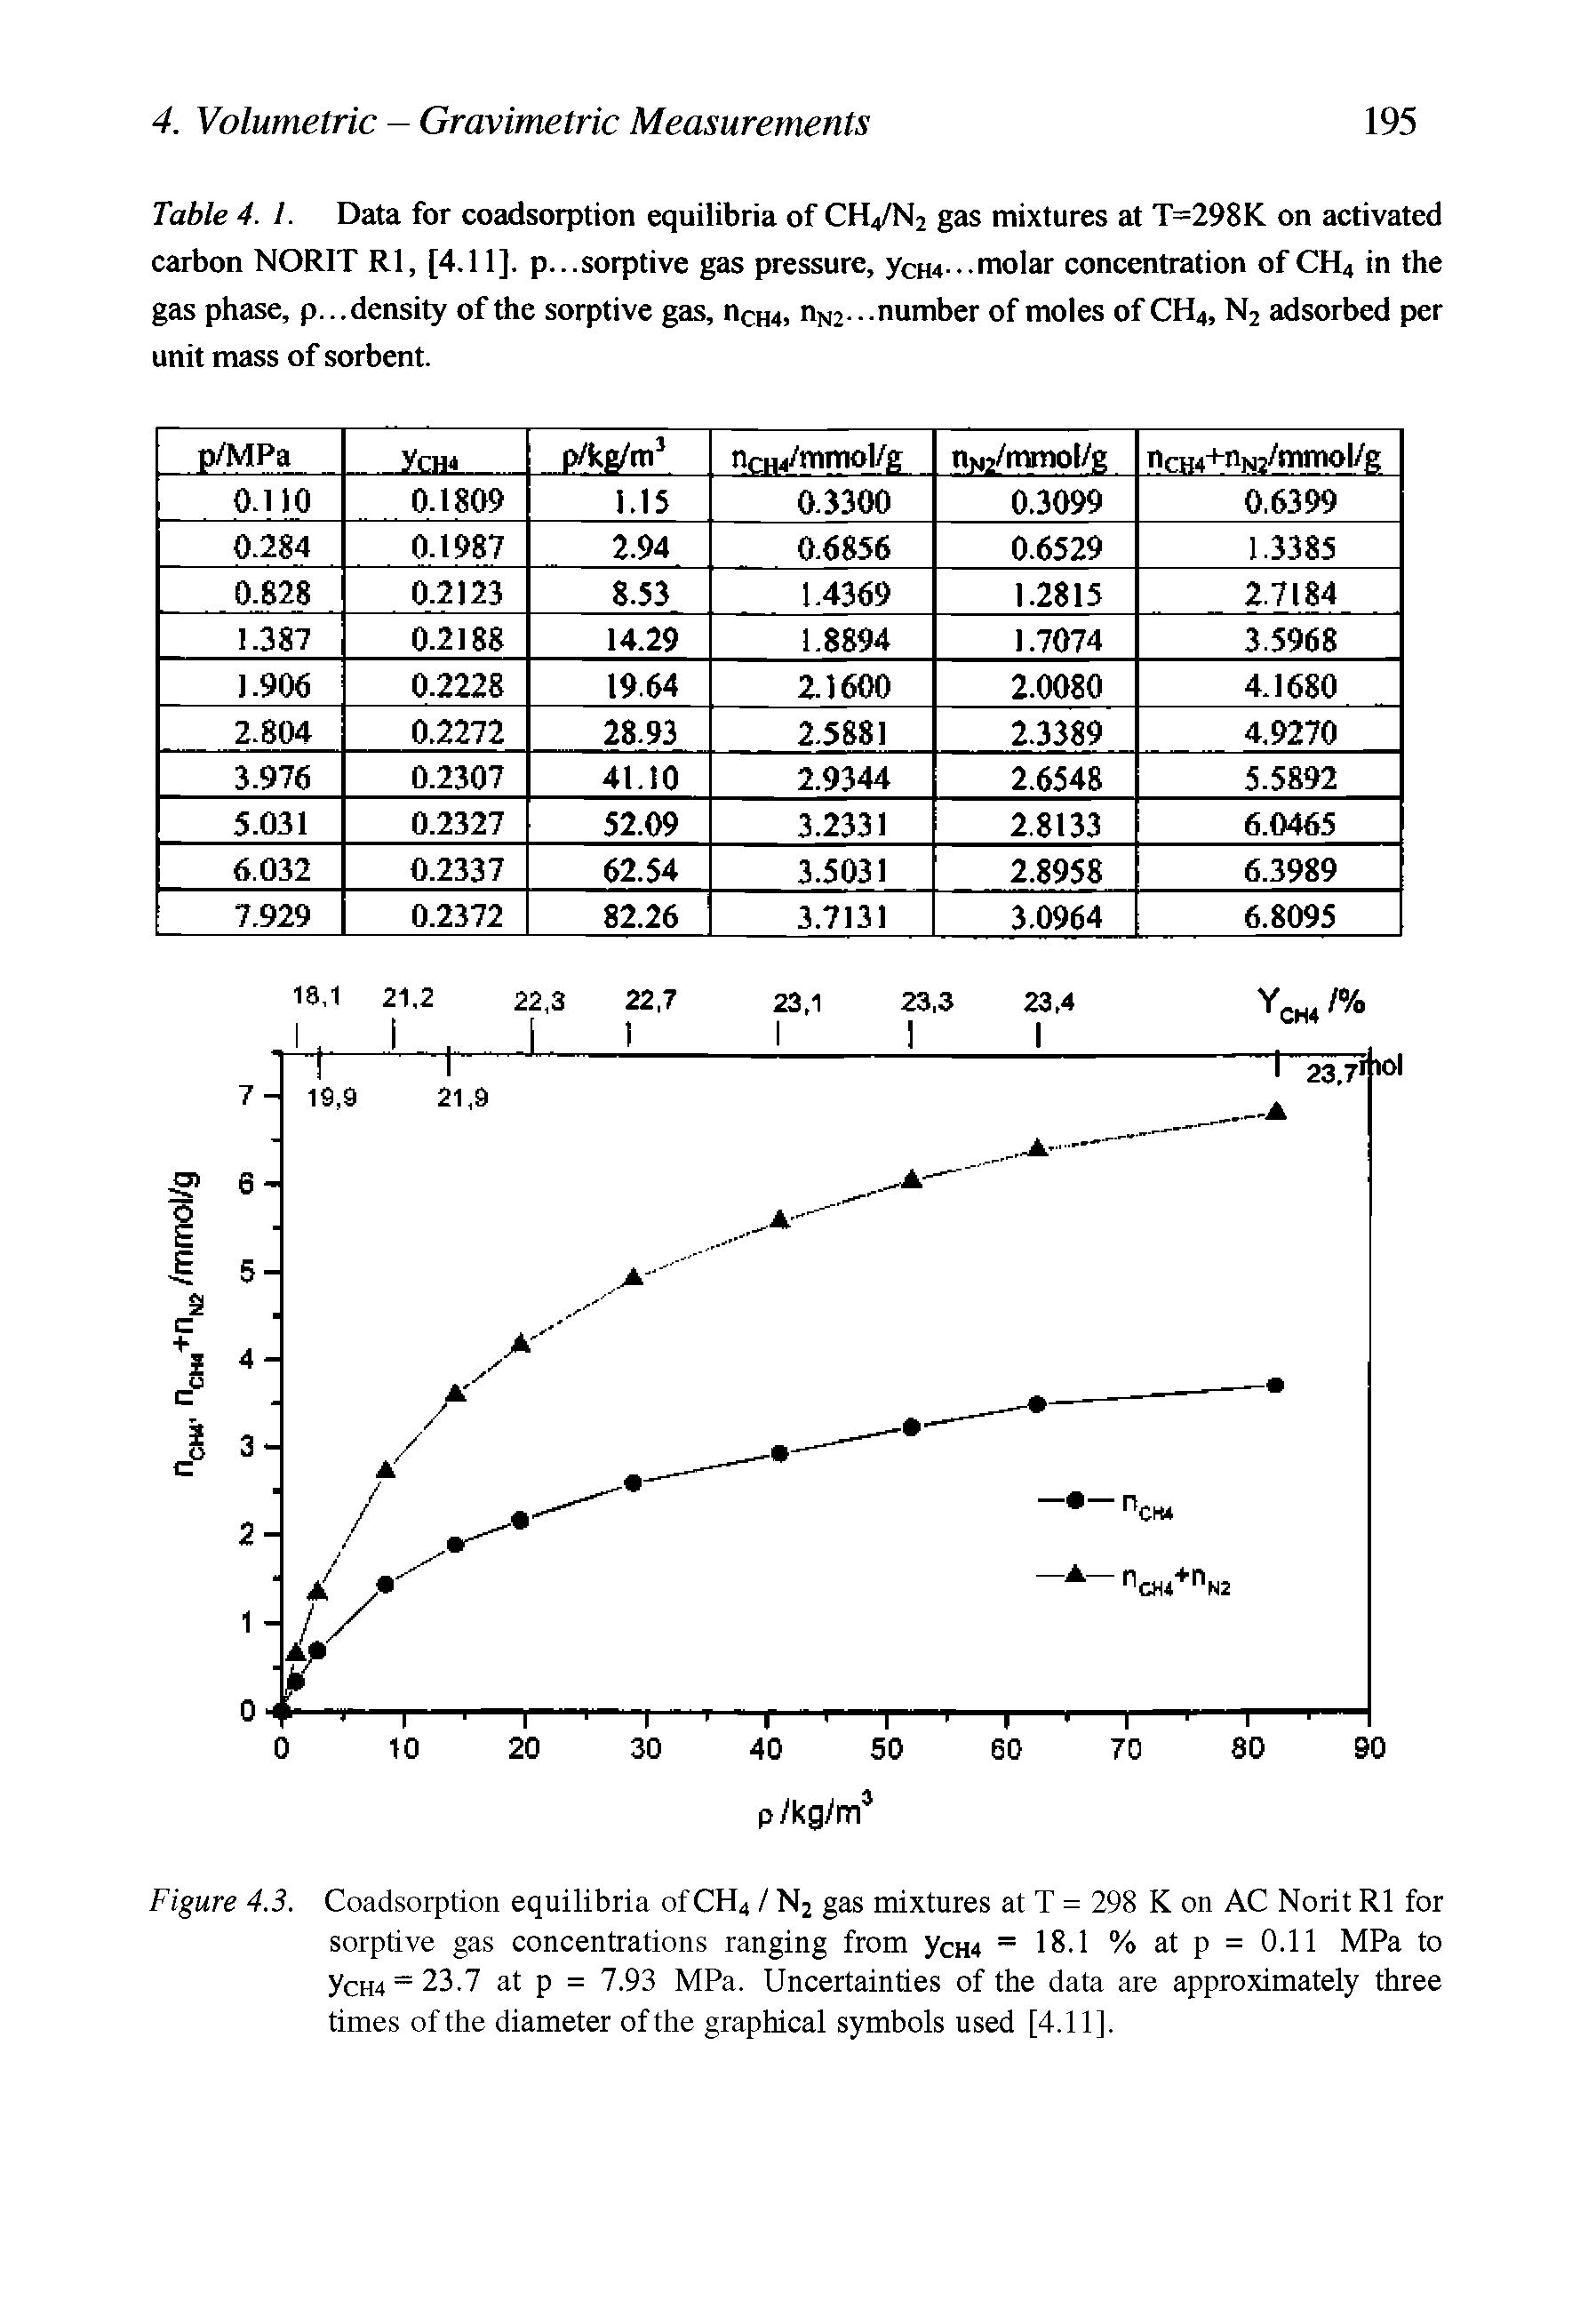 Figure 4.3. Coadsorption equilibria ofCH4 / N2 gas mixtures at T = 298 K on AC Norit Rl for sorptive gas concentrations ranging from ycH4 = 18.1 % at p = 0.11 MPa to ycH4 = 23.7 at p = 7.93 MPa. Uncertainties of the data are approximately three times of the diameter of the graphical symbols used [4.11].